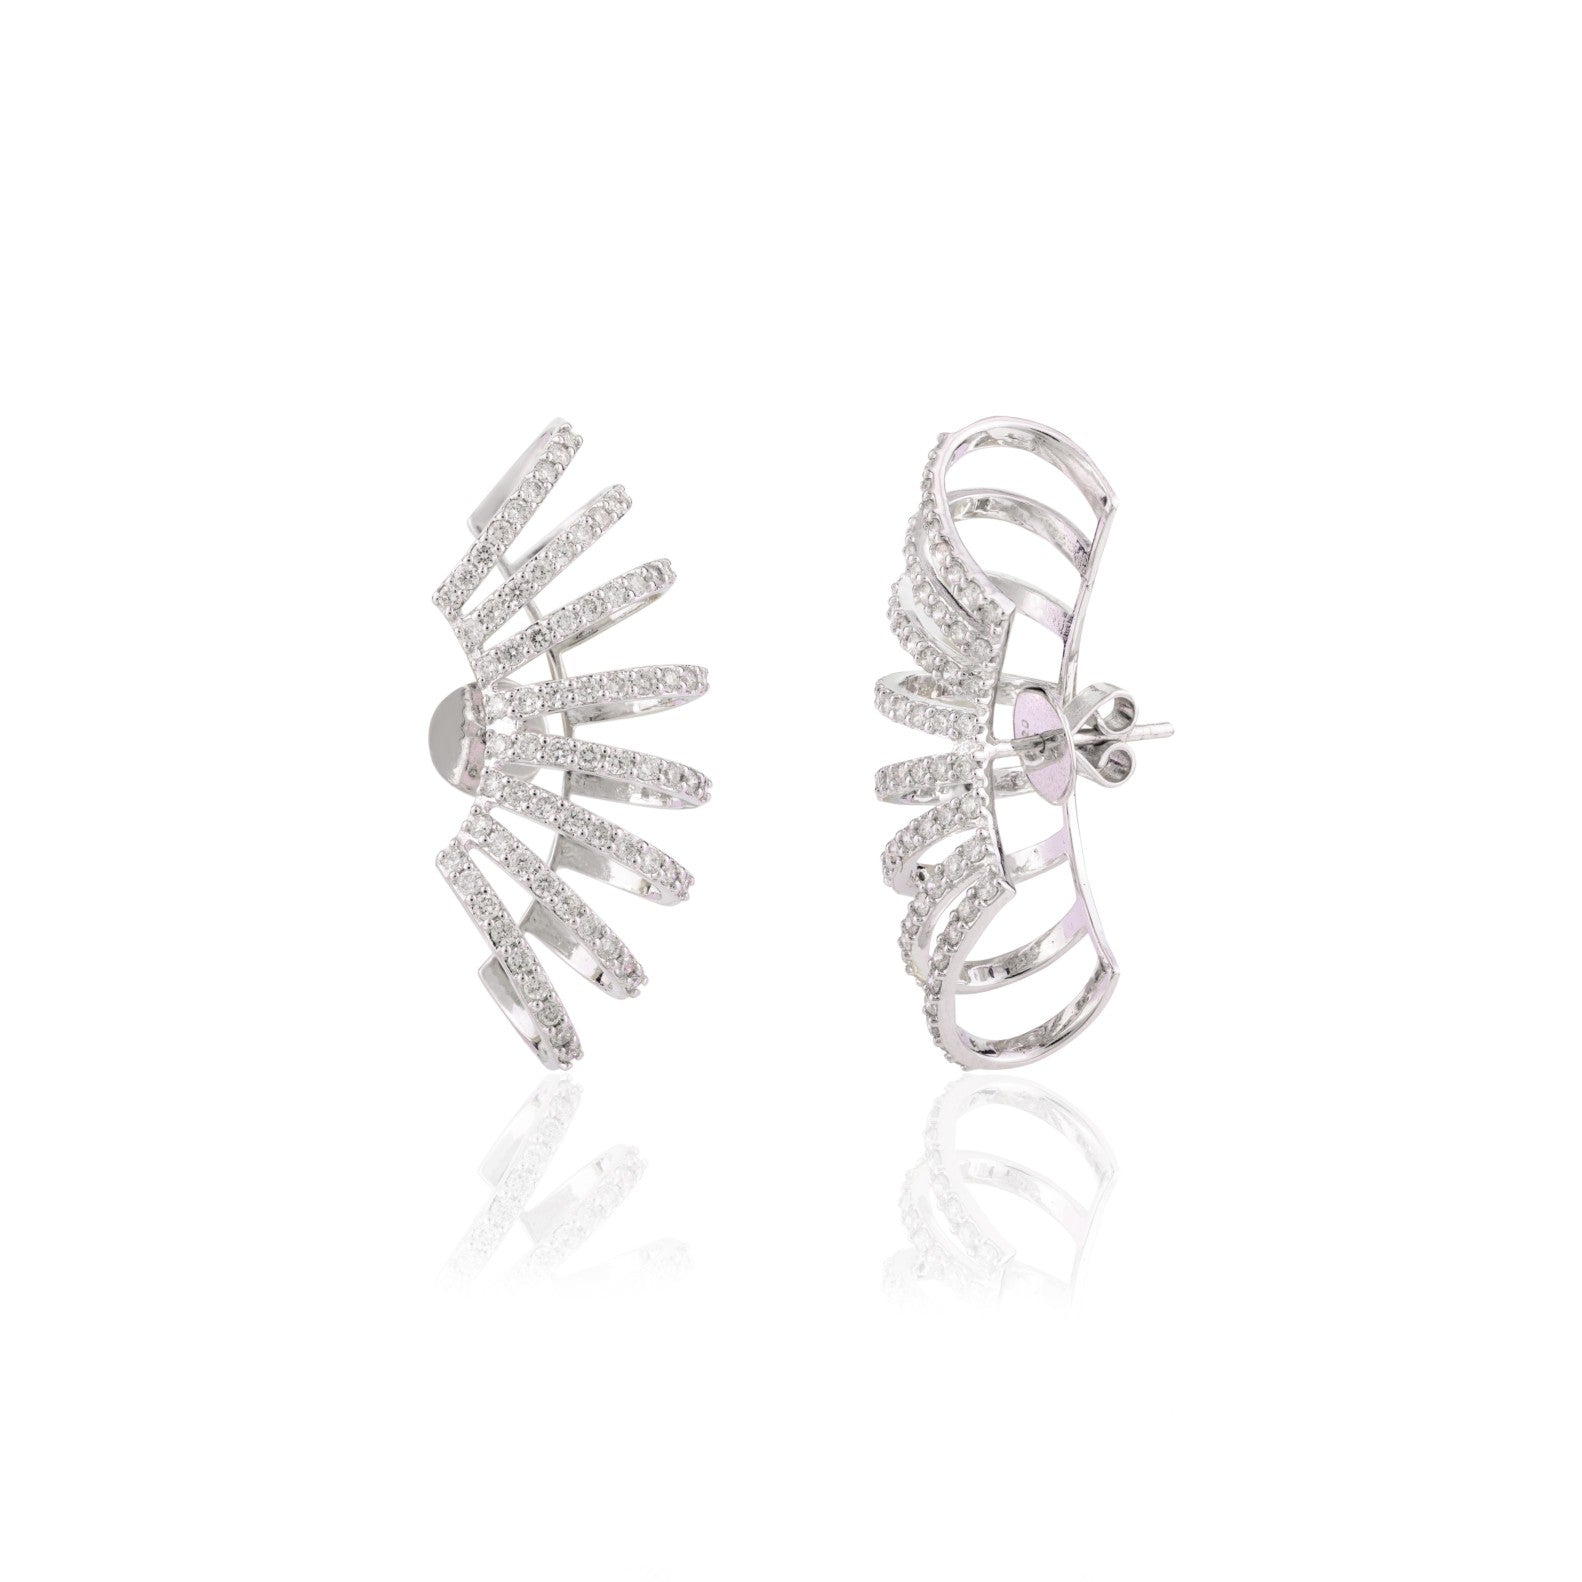 18K Solid White Gold Cocktail Climber Diamond Cuff Earrings